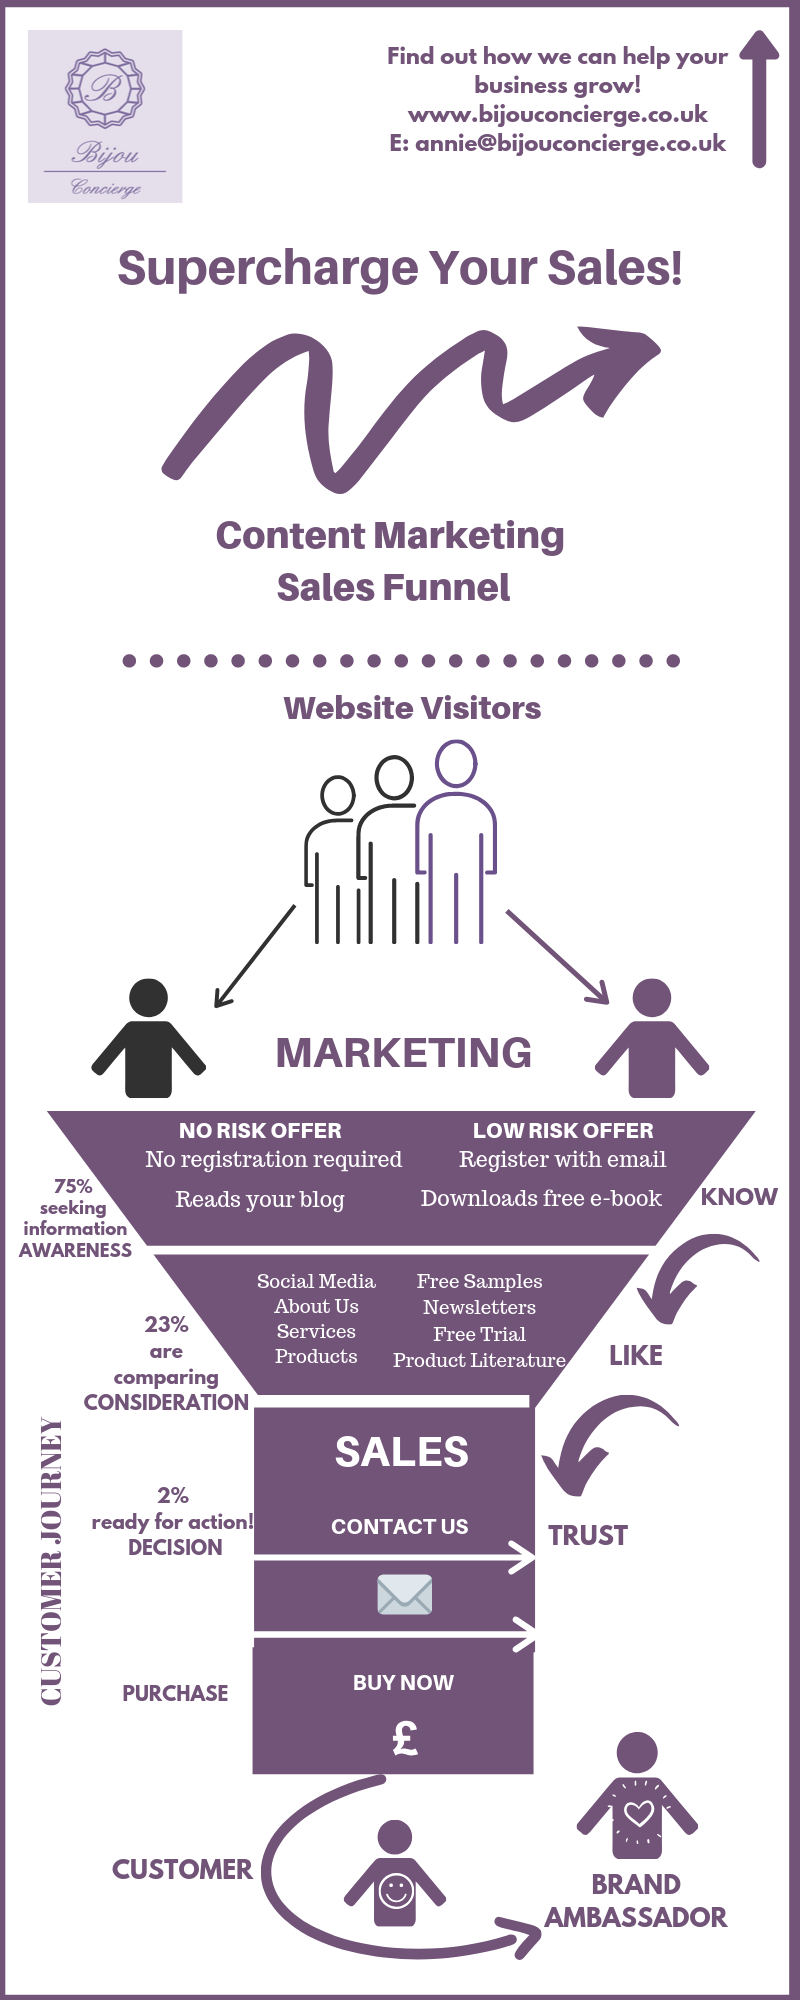 Content Marketing Sales Funnel Infographic